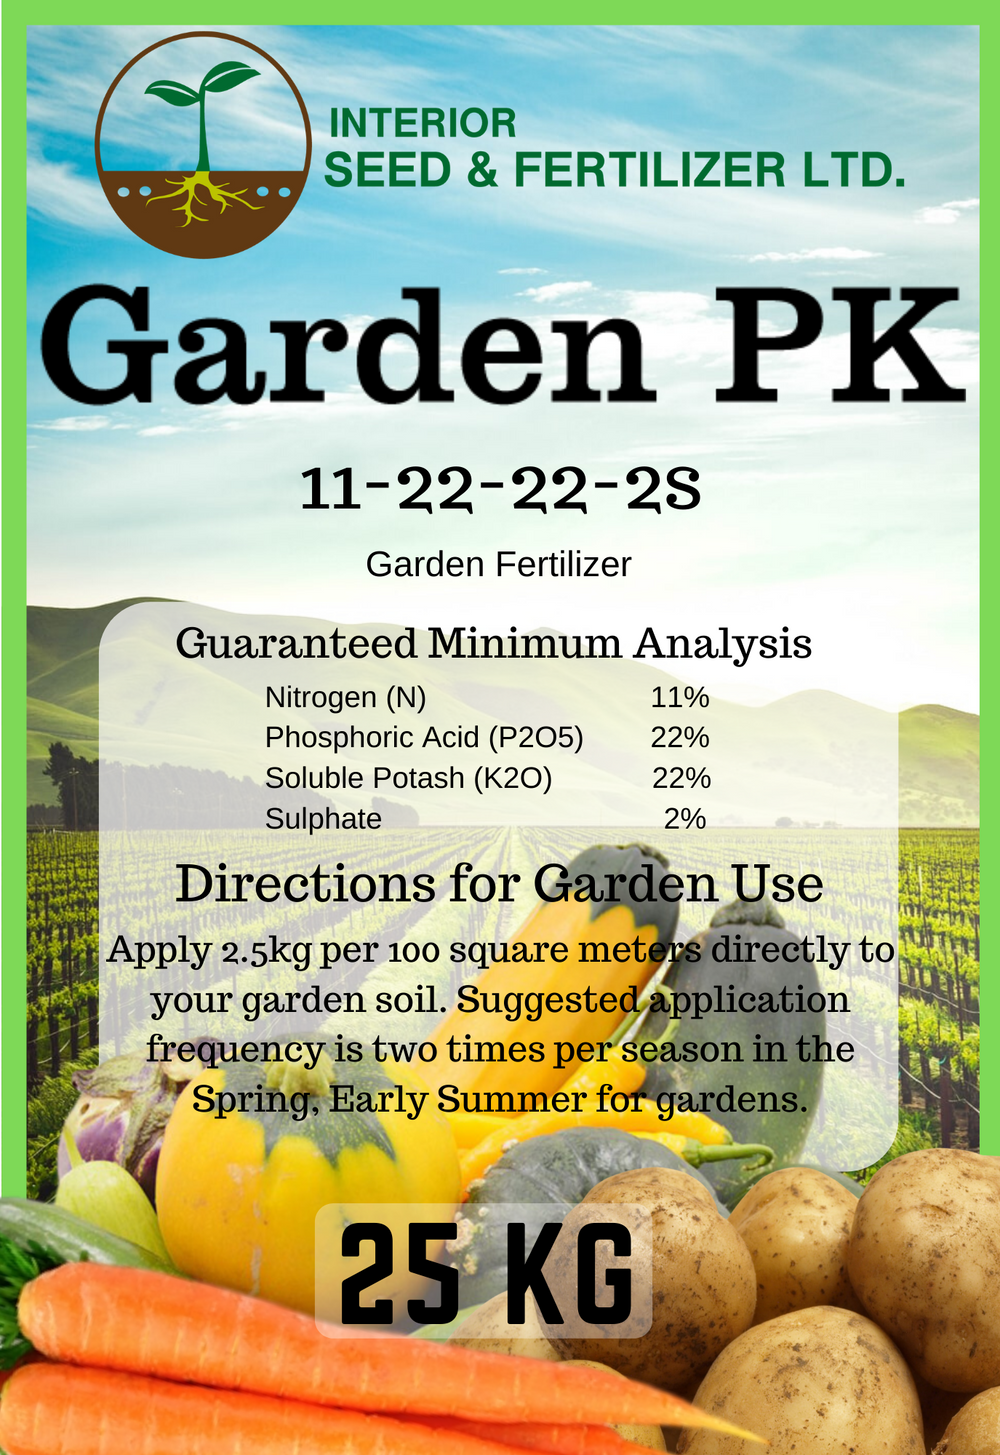 Fertilizer perfect for: Potatoes, Beans, Peas, Carrots, Cucumbers, Celery, Squash and Sunflowers from Interior Seed and Fertilizer Cranbrook BC